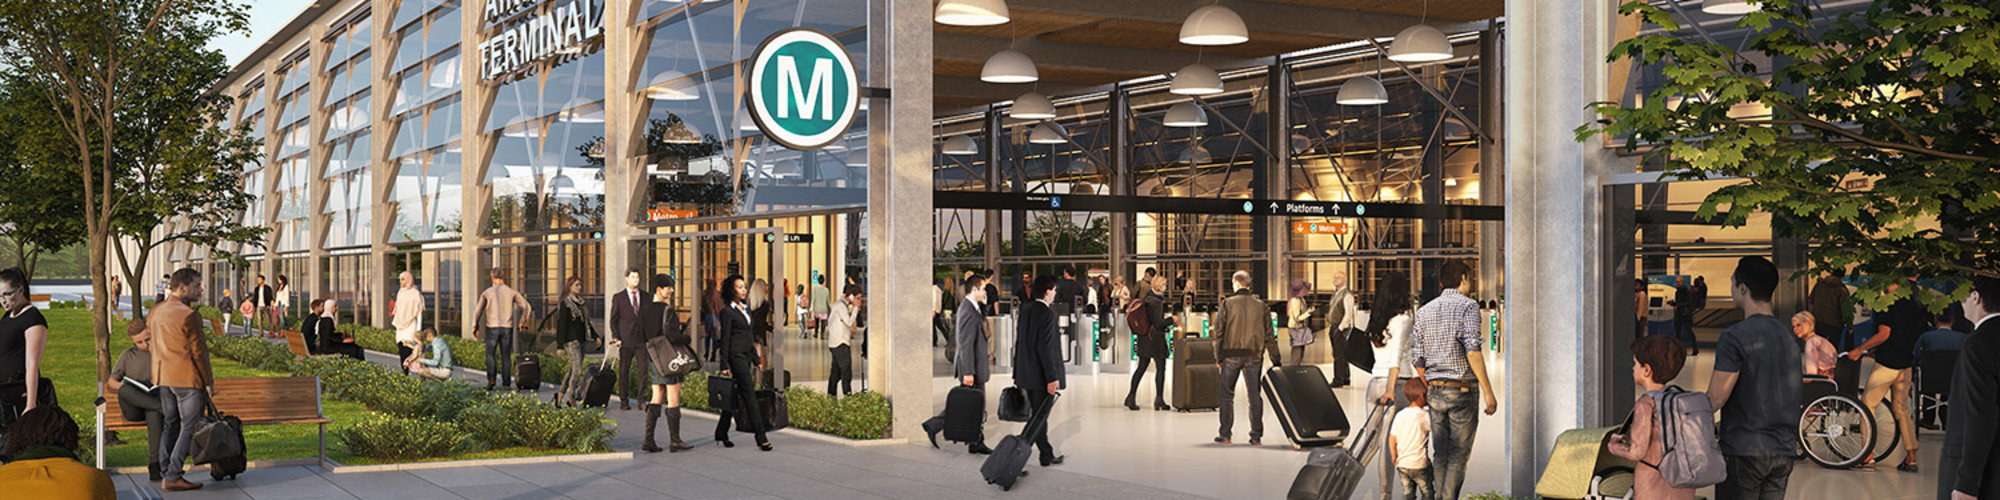 Artist's impression of Airport Terminal Station